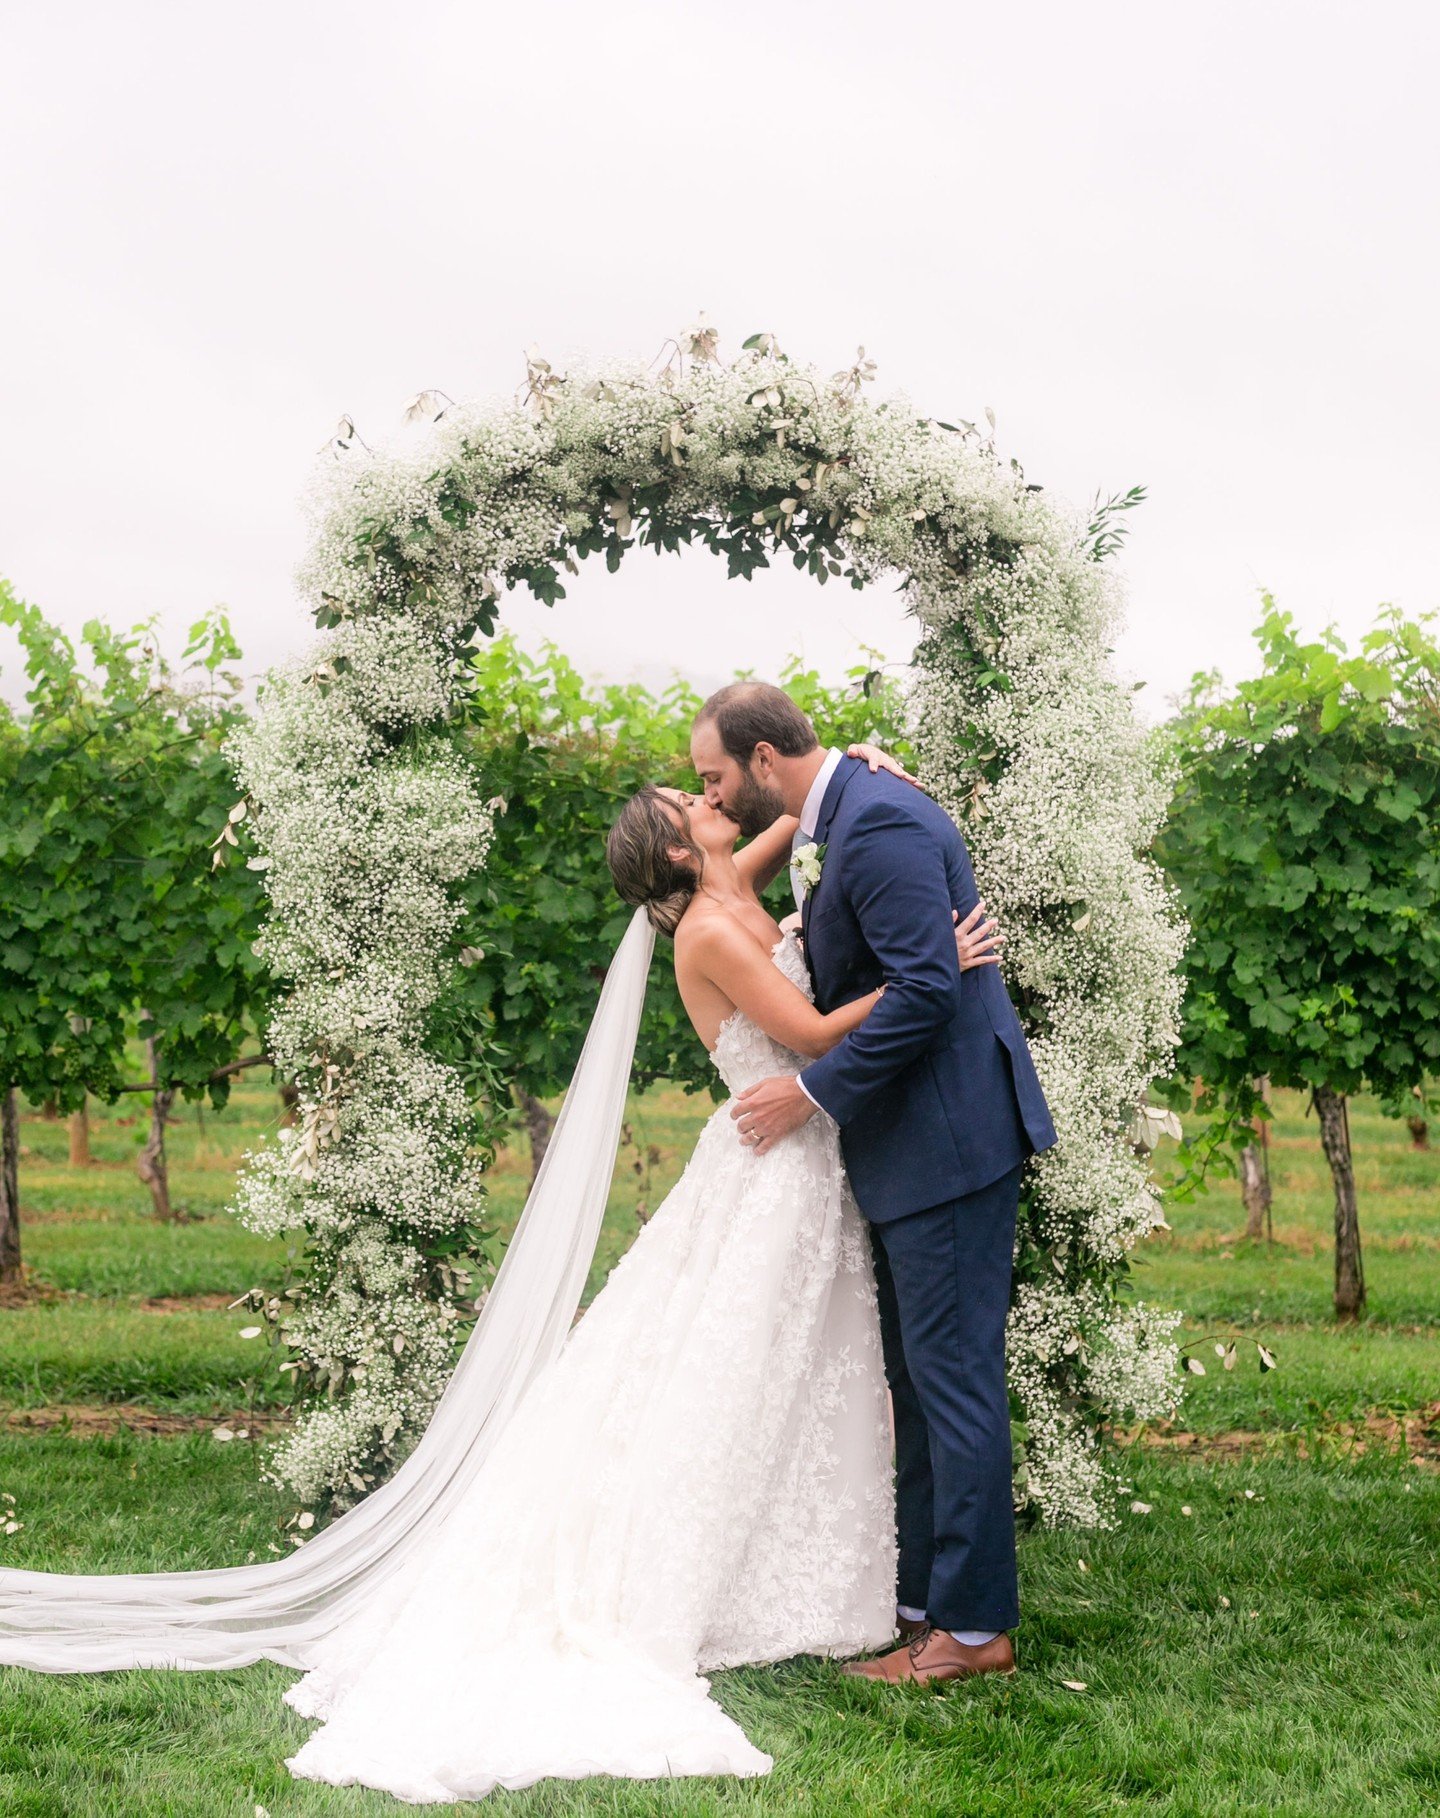 They say rain on your wedding day is good luck &amp; that's definitely true for this couple! 🌧️🤍

Photography | @mordiphotographie
Planning &amp; Design | @j.scottweddings
Venue | @keswickvineyards 
Video | @laurelandfilms
Stationery &amp; Custom l